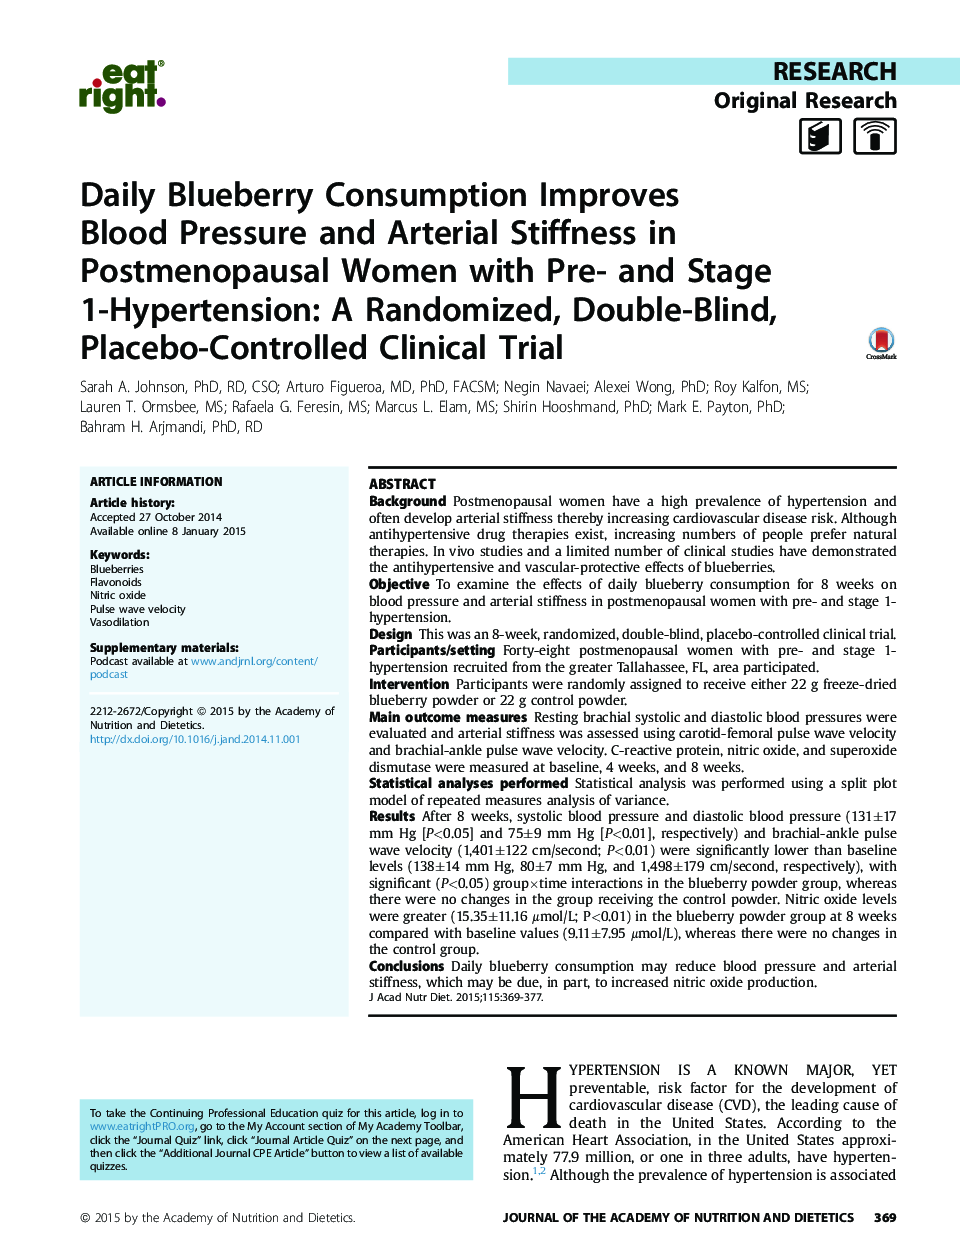 Daily Blueberry Consumption Improves Blood Pressure and Arterial Stiffness in Postmenopausal Women with Pre- and Stage 1-Hypertension: A Randomized, Double-Blind, Placebo-Controlled Clinical Trial 